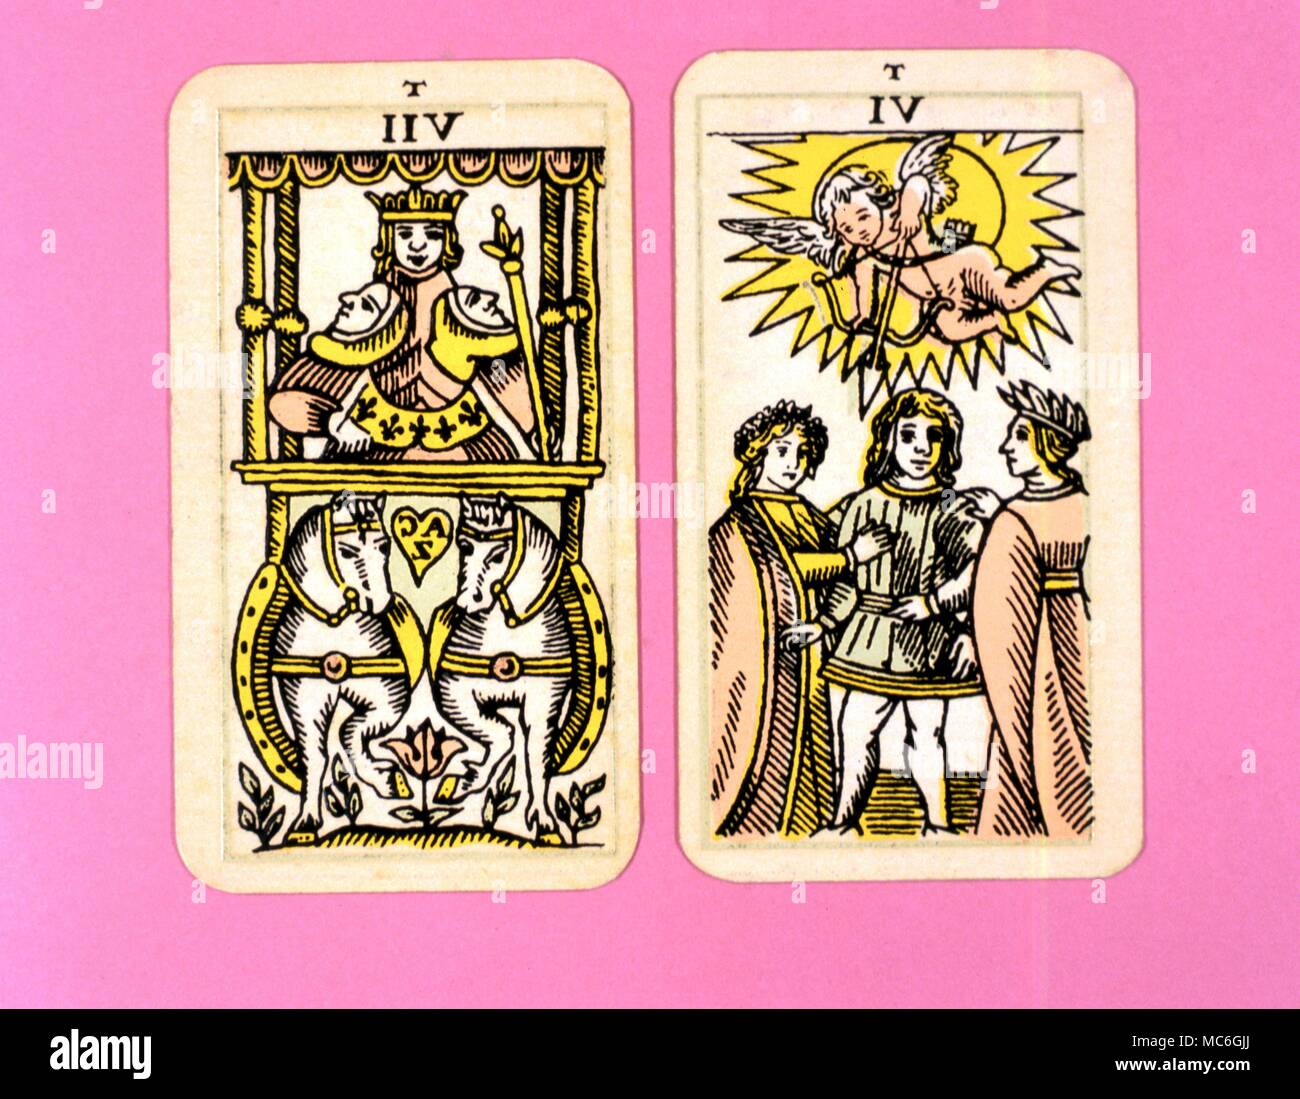 Tarot Cards-Majo Arcana- The Parisian Tarot. Card 6. The Lovers and Card 7. The Chariot. Two cards from a Major Arcana picture Tarot, probably designed in an archaizing style in loose imitation of the Rosicrucian deck designed by Pamela Coleman Smith, alongside A.E.Waite, and various earlier decks, such as that published by Encausse (Papus) in The Tarot of the Bohemians at the end of the 19th century, post 1905, but earlier than 1912. The name Parisian Tarot was given by the owner of the deck - it might however be called the Tau Tarot, from the intriguing letter Tau at the head of each card. Stock Photo